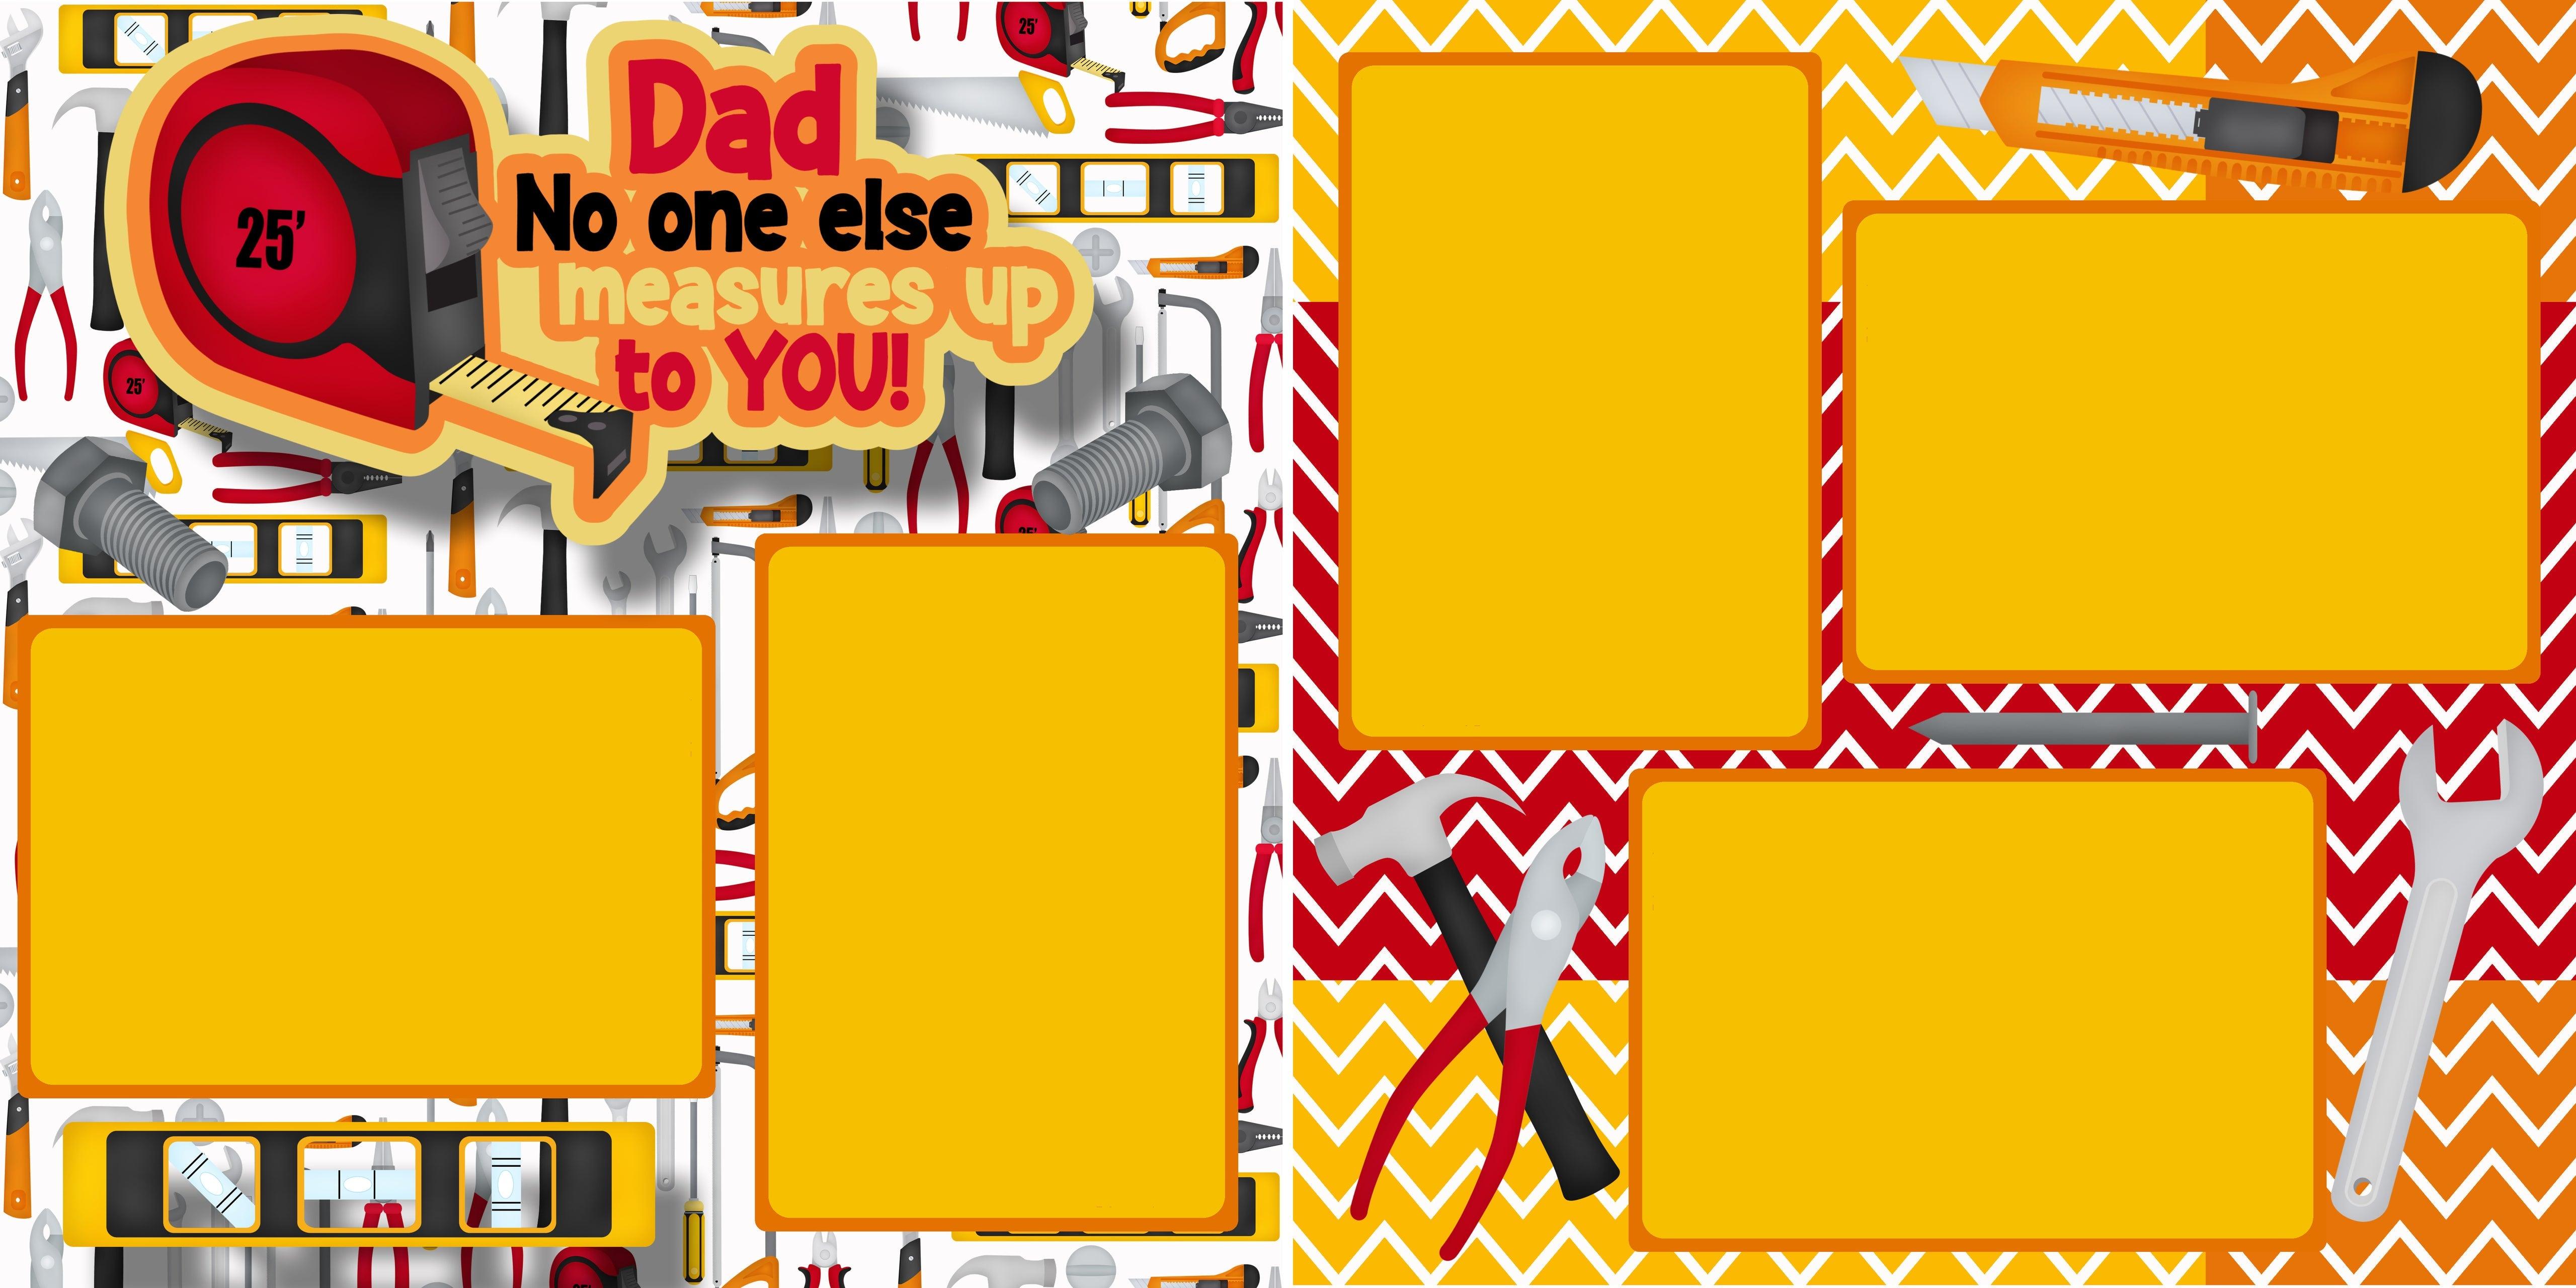 Father's Day Measures Up To You (2) - 12 x 12 Premade, Printed Scrapbook Pages by SSC Designs